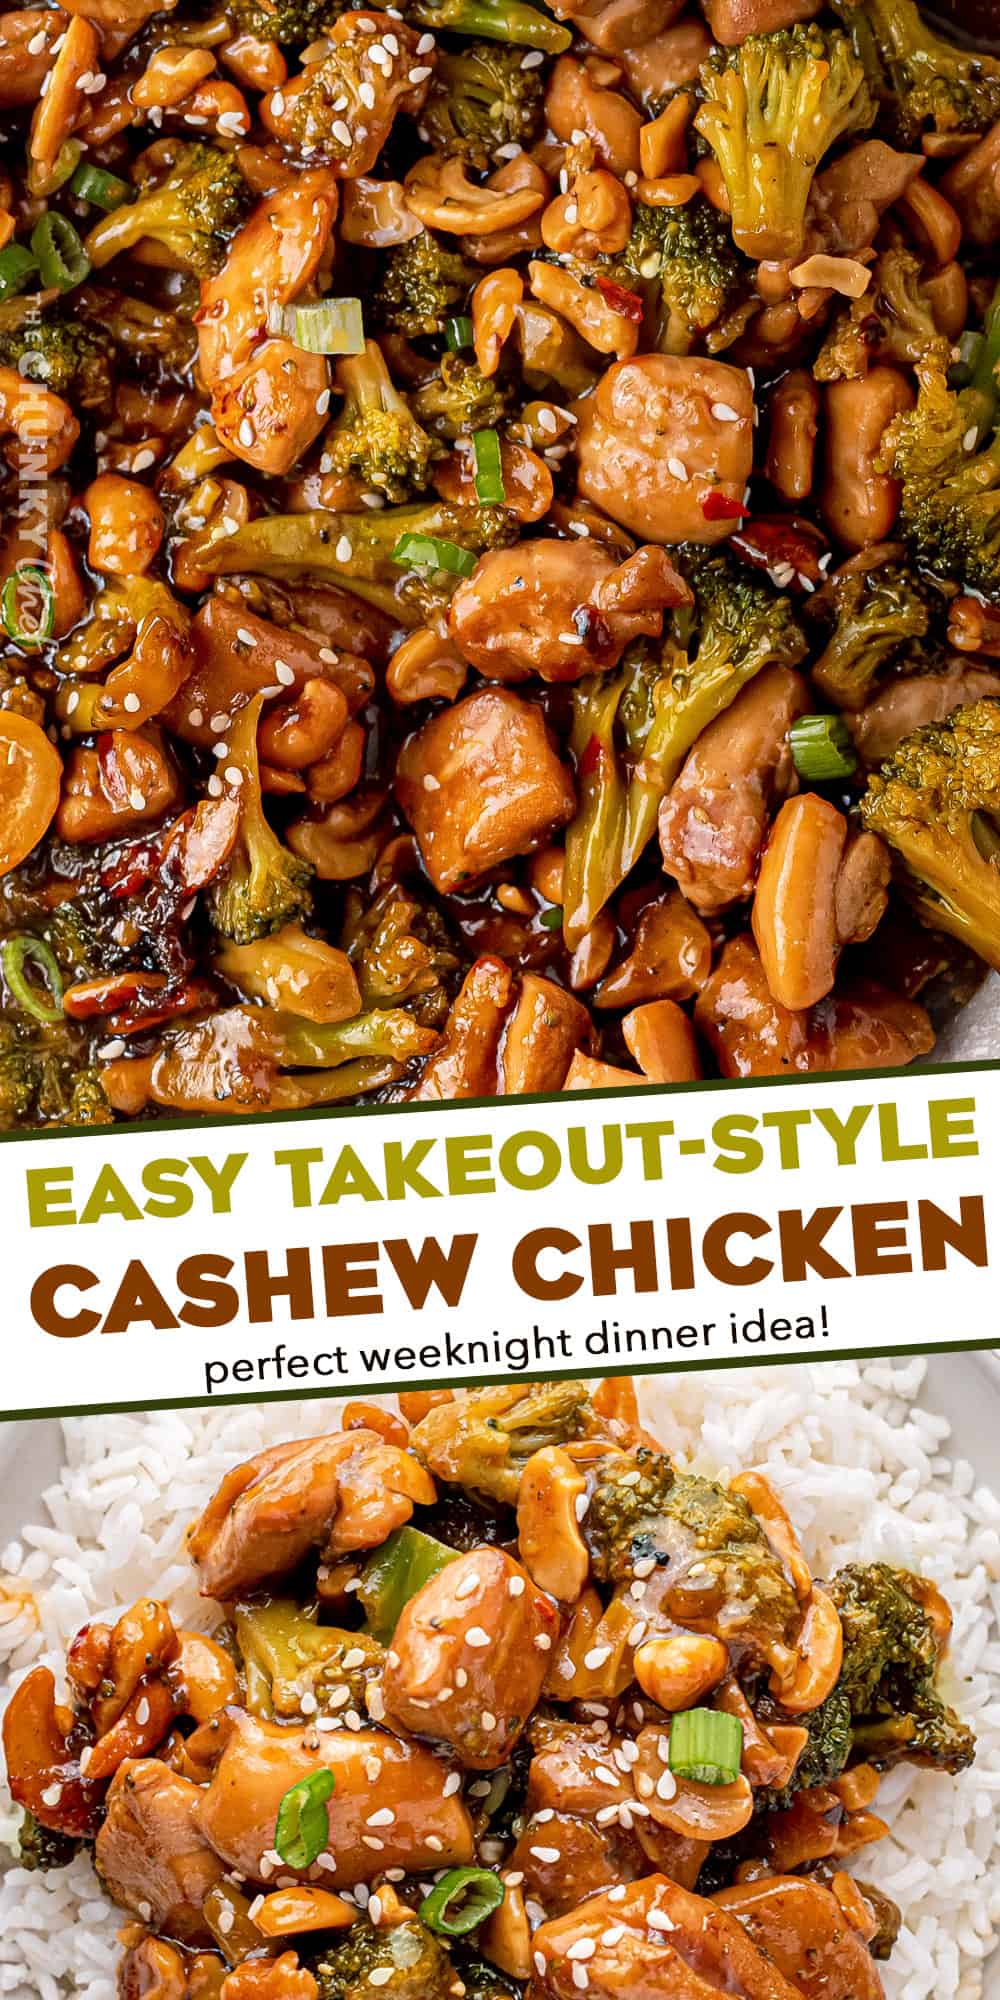 Cashew Chicken (Takeout-Style) 30 minute meal - The Chunky Chef